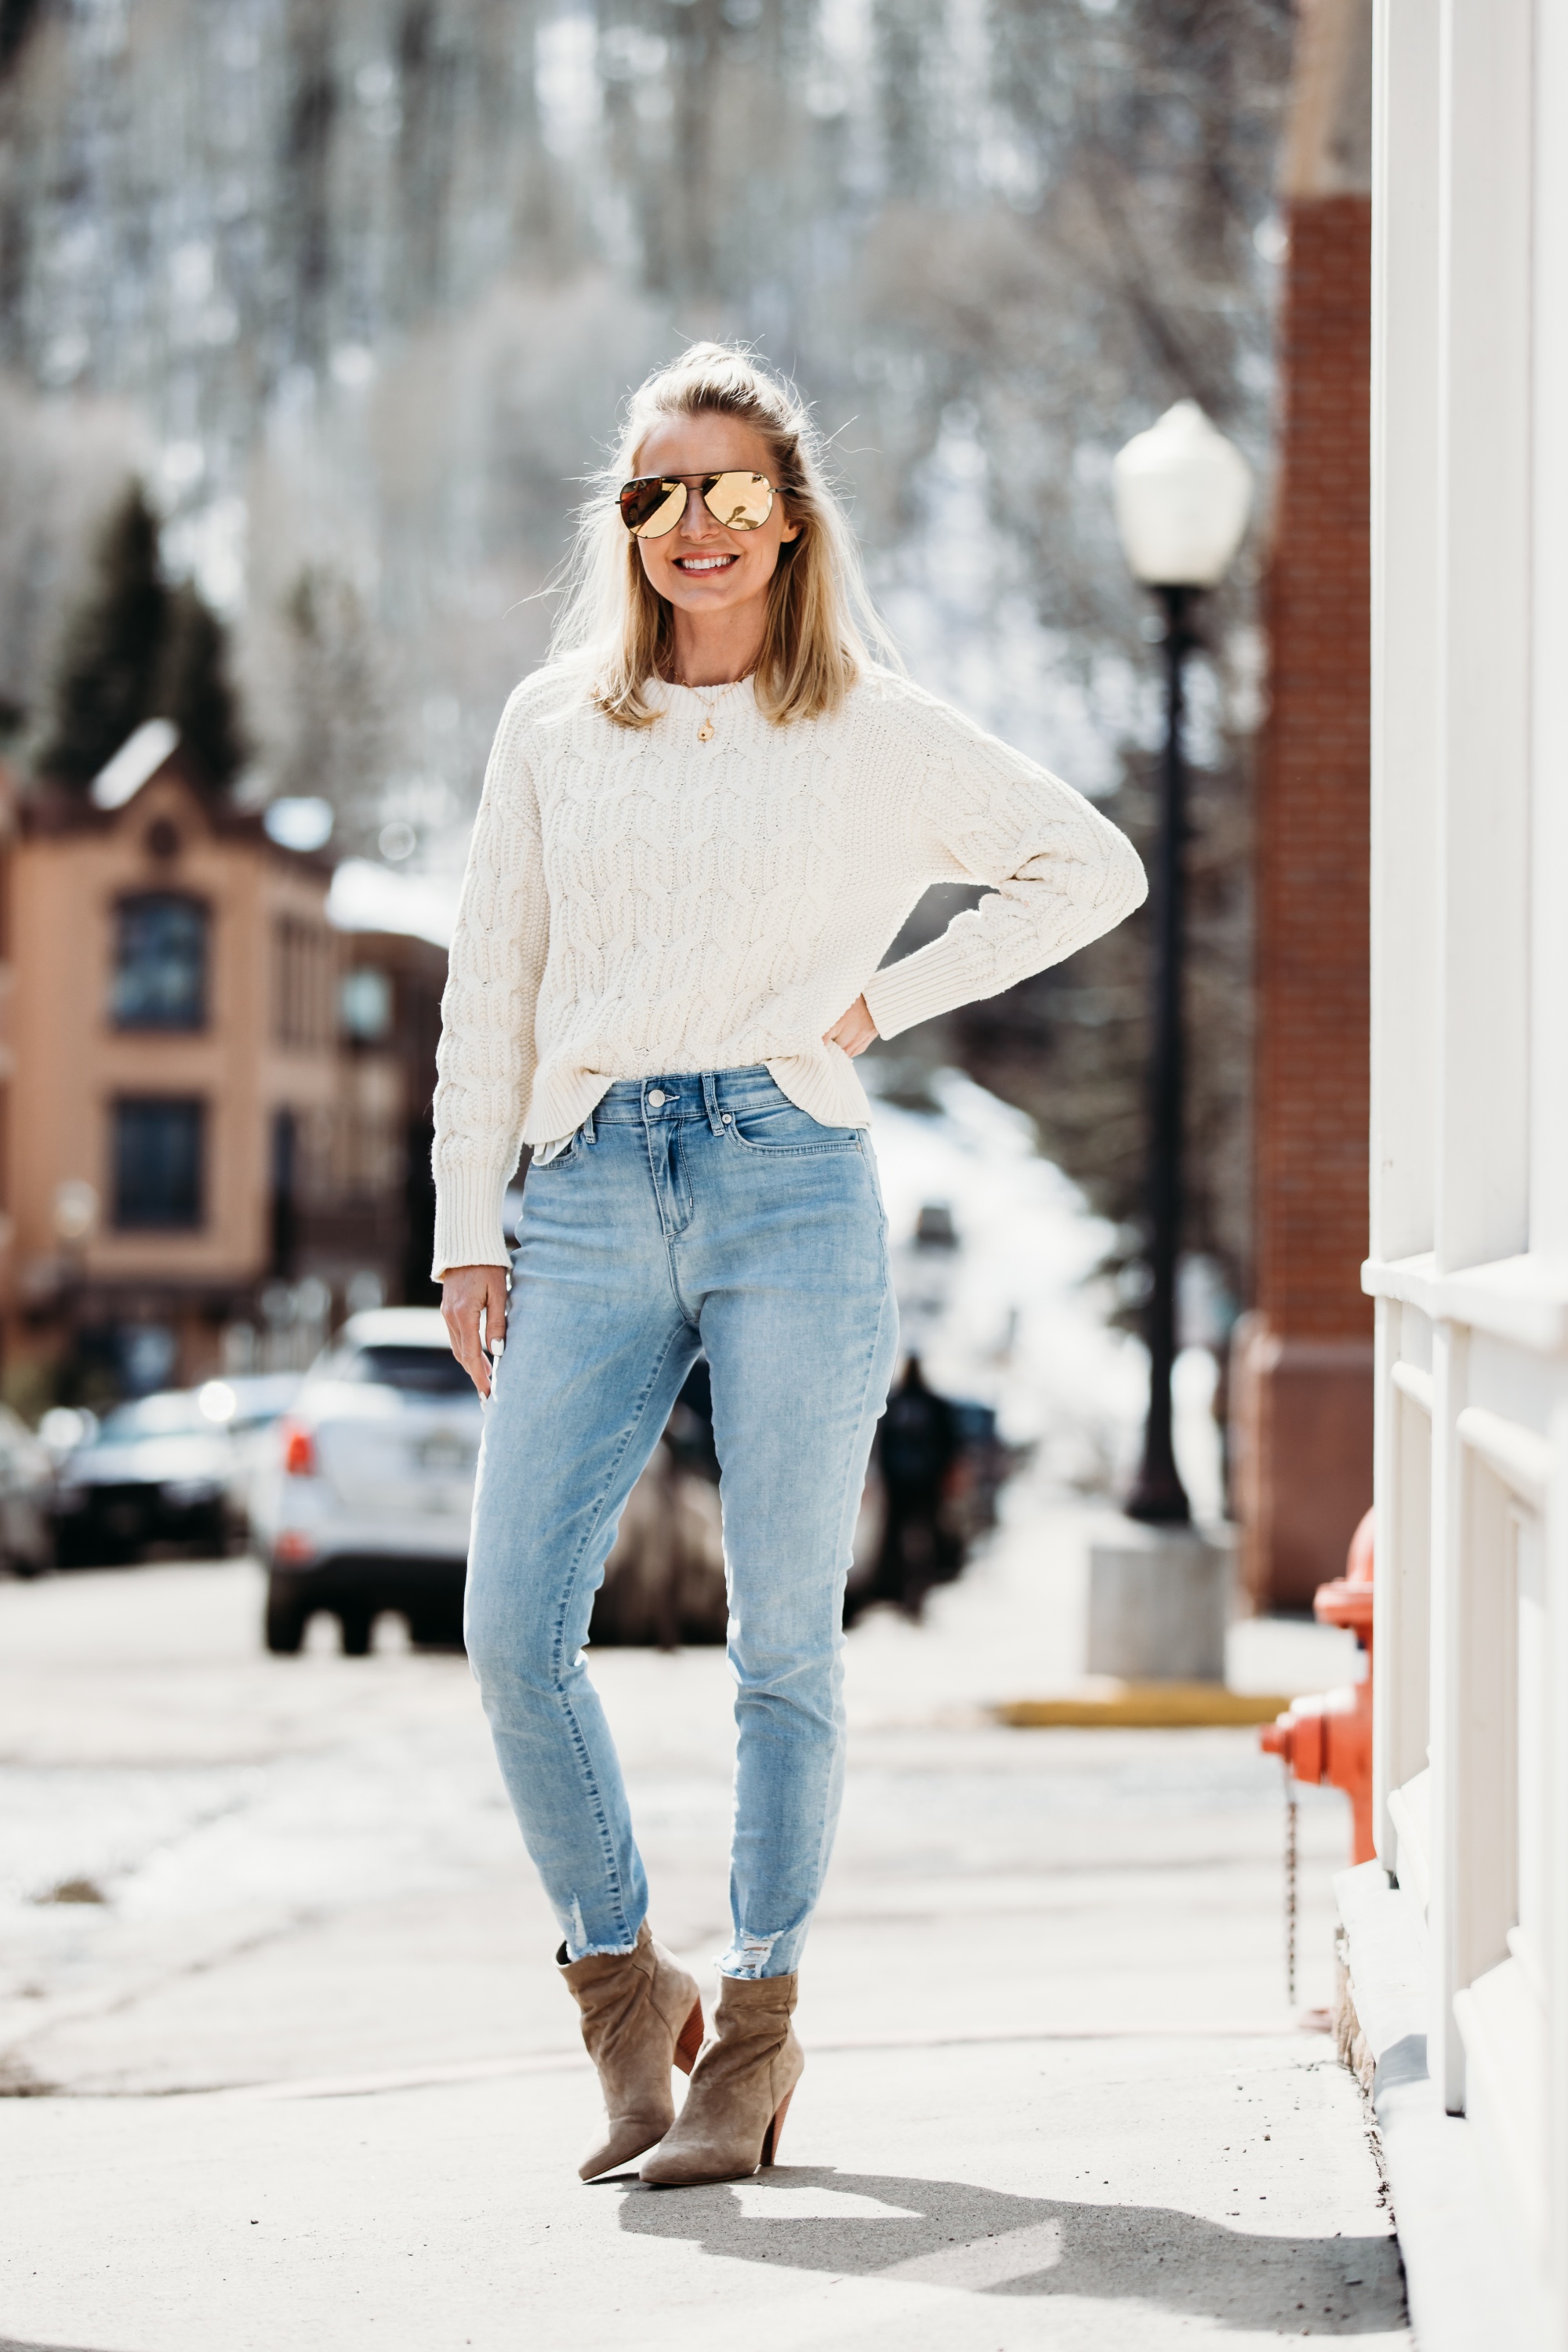 White Sweaters, Fashion blogger Erin Busbee of BusbeeStyle.com wearing a white cable knit sweater by Scoop, light wash skinny jeans by Sofia Vergara, brown suede booties, and green mirrored QUAY sunglasses from Walmart in Telluride, Colorado